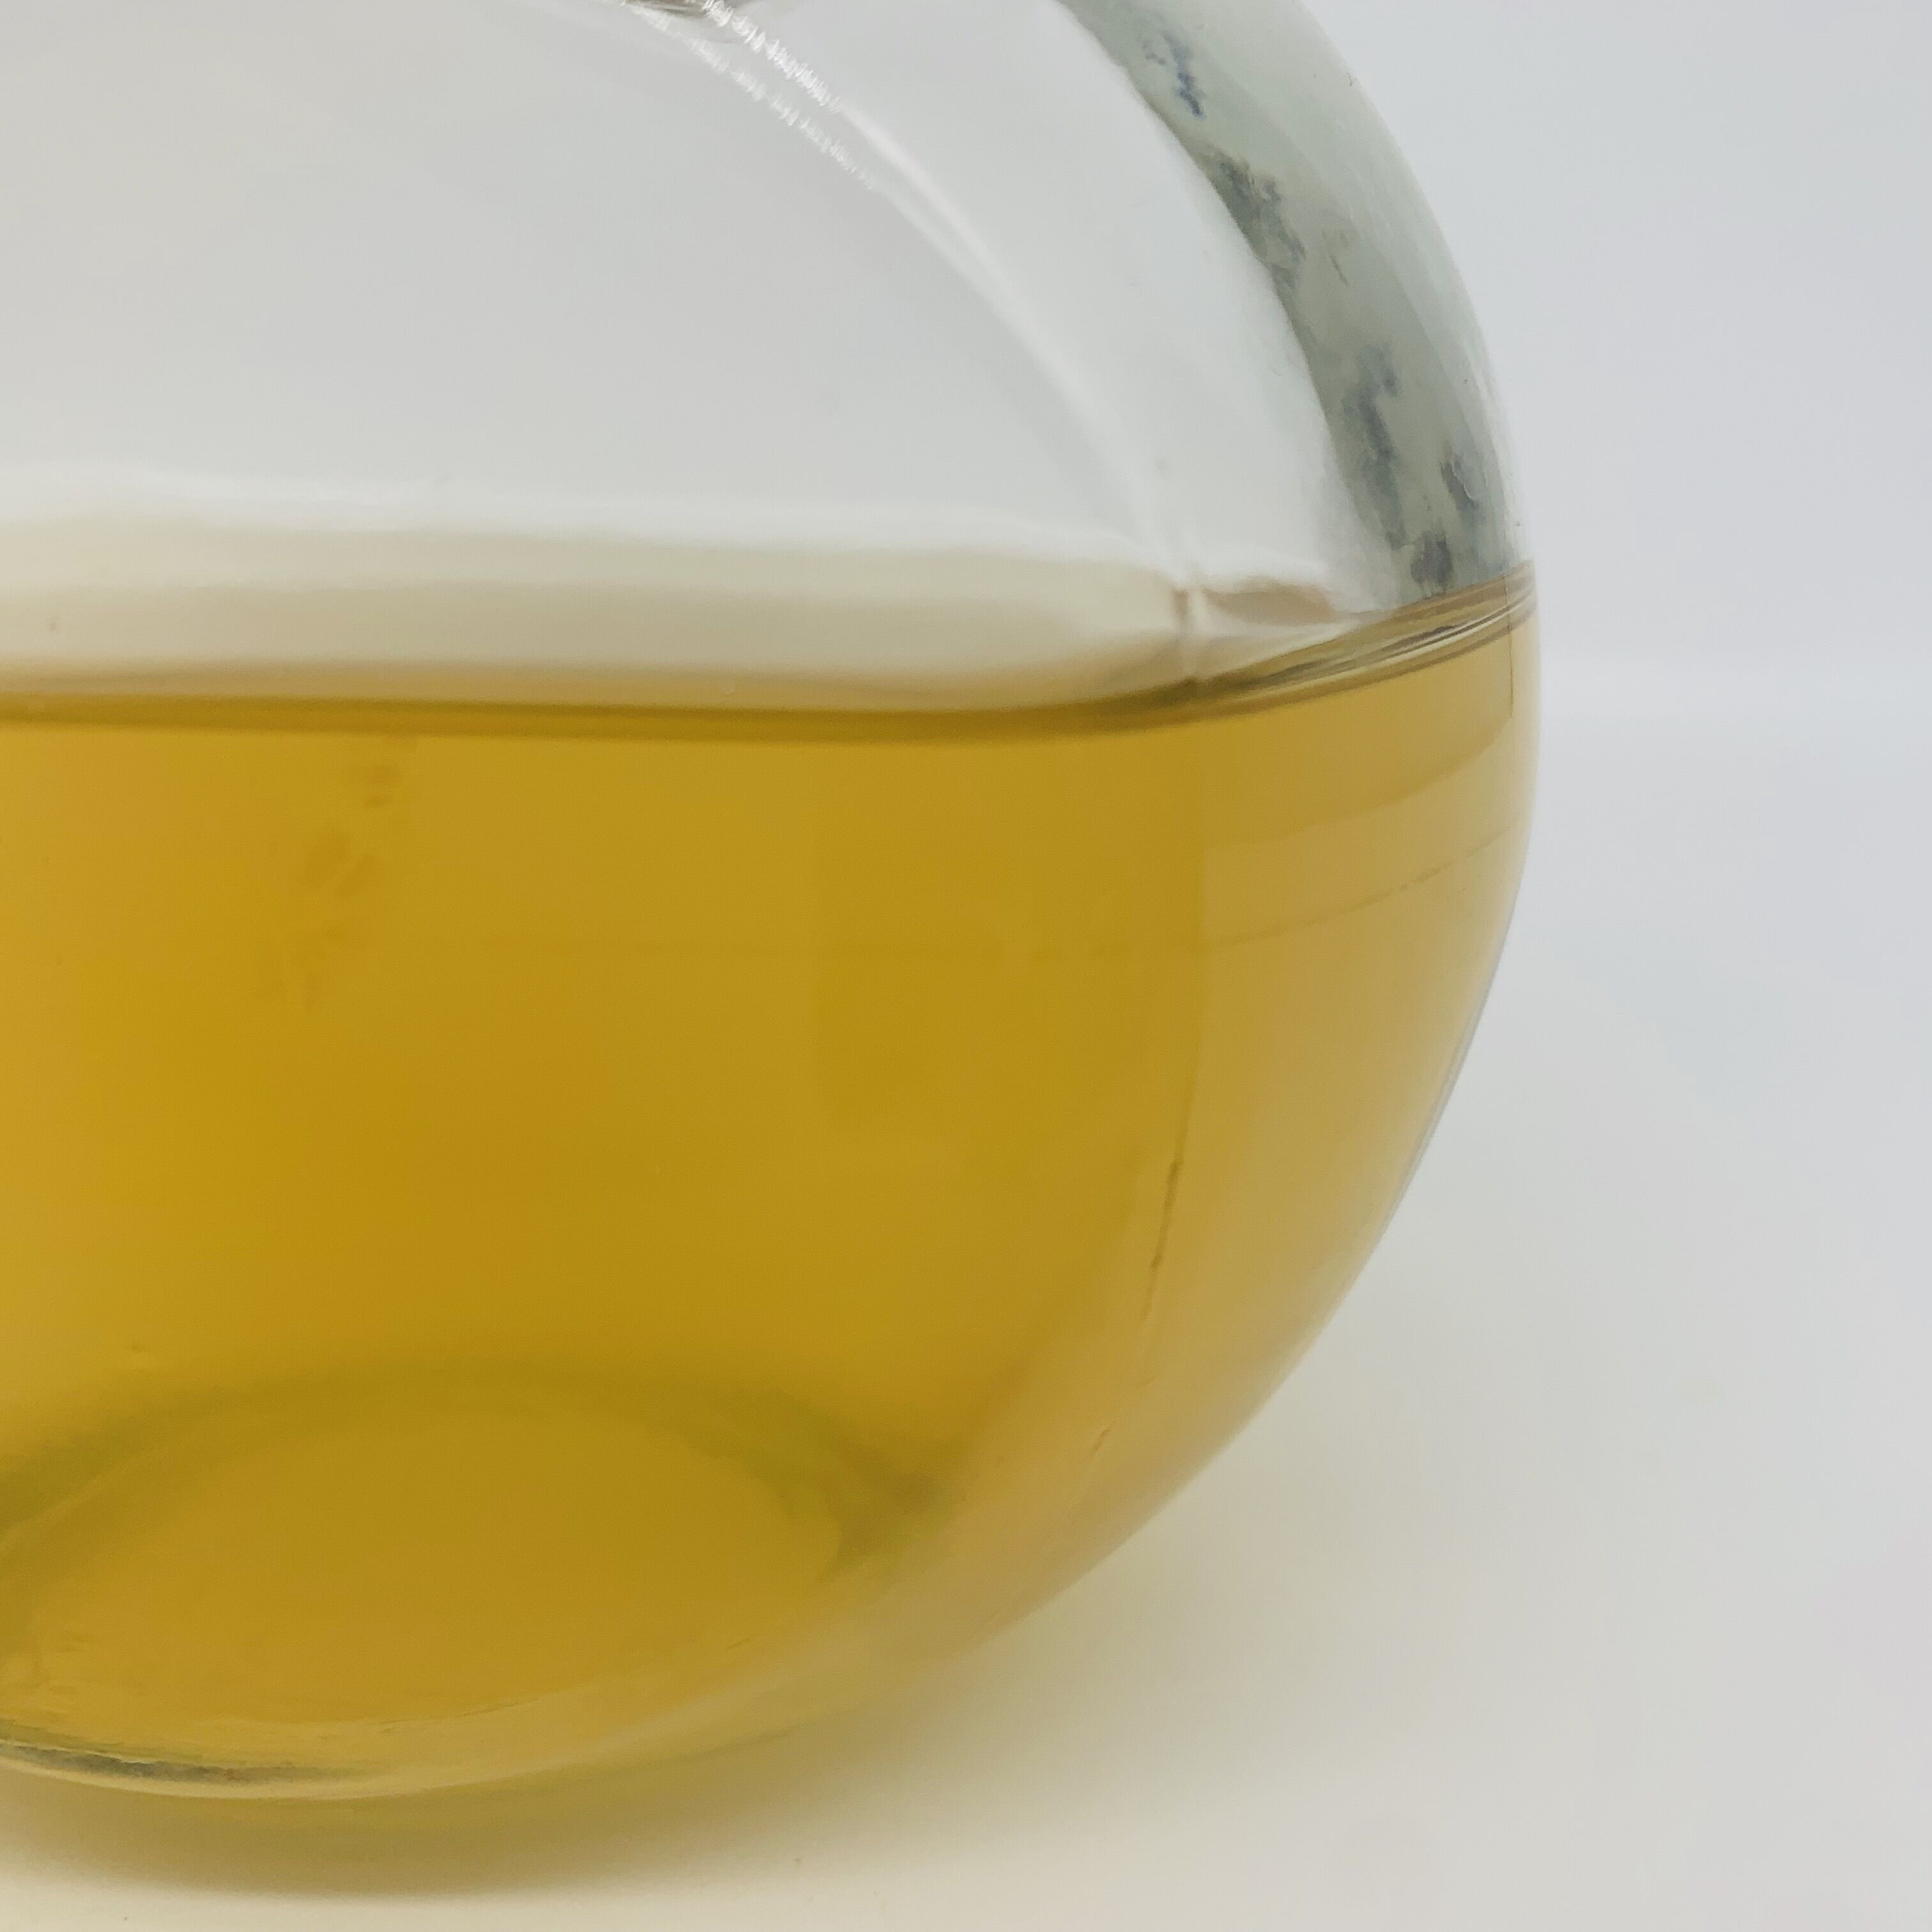 Malt extract 100% water-soluble